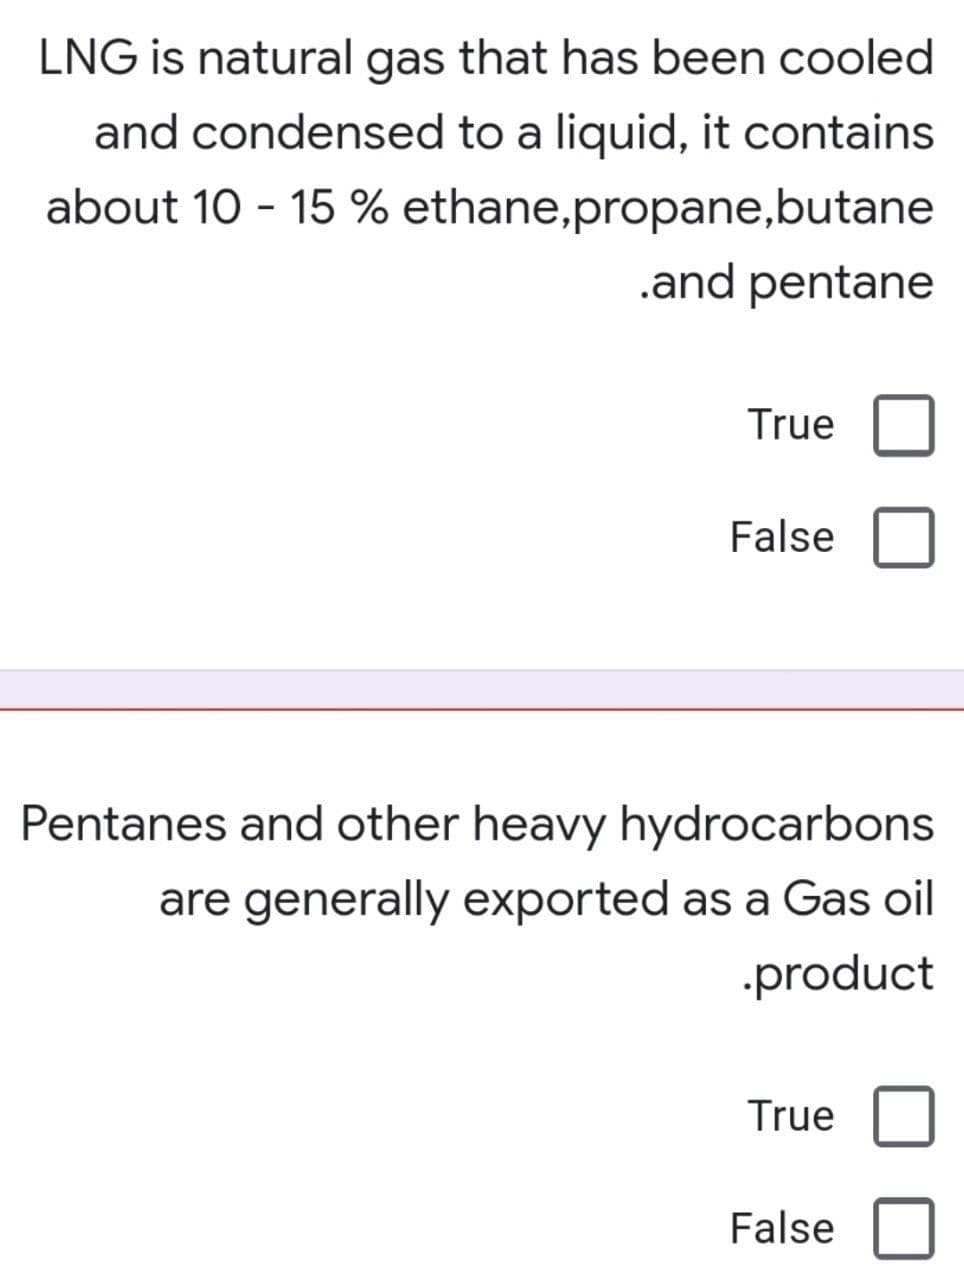 LNG is natural gas that has been cooled
and condensed to a liquid, it contains
about 10 - 15 % ethane,propane,butane
.and pentane
True
False
Pentanes and other heavy hydrocarbons
are generally exported as a Gas oil
.product
True
False